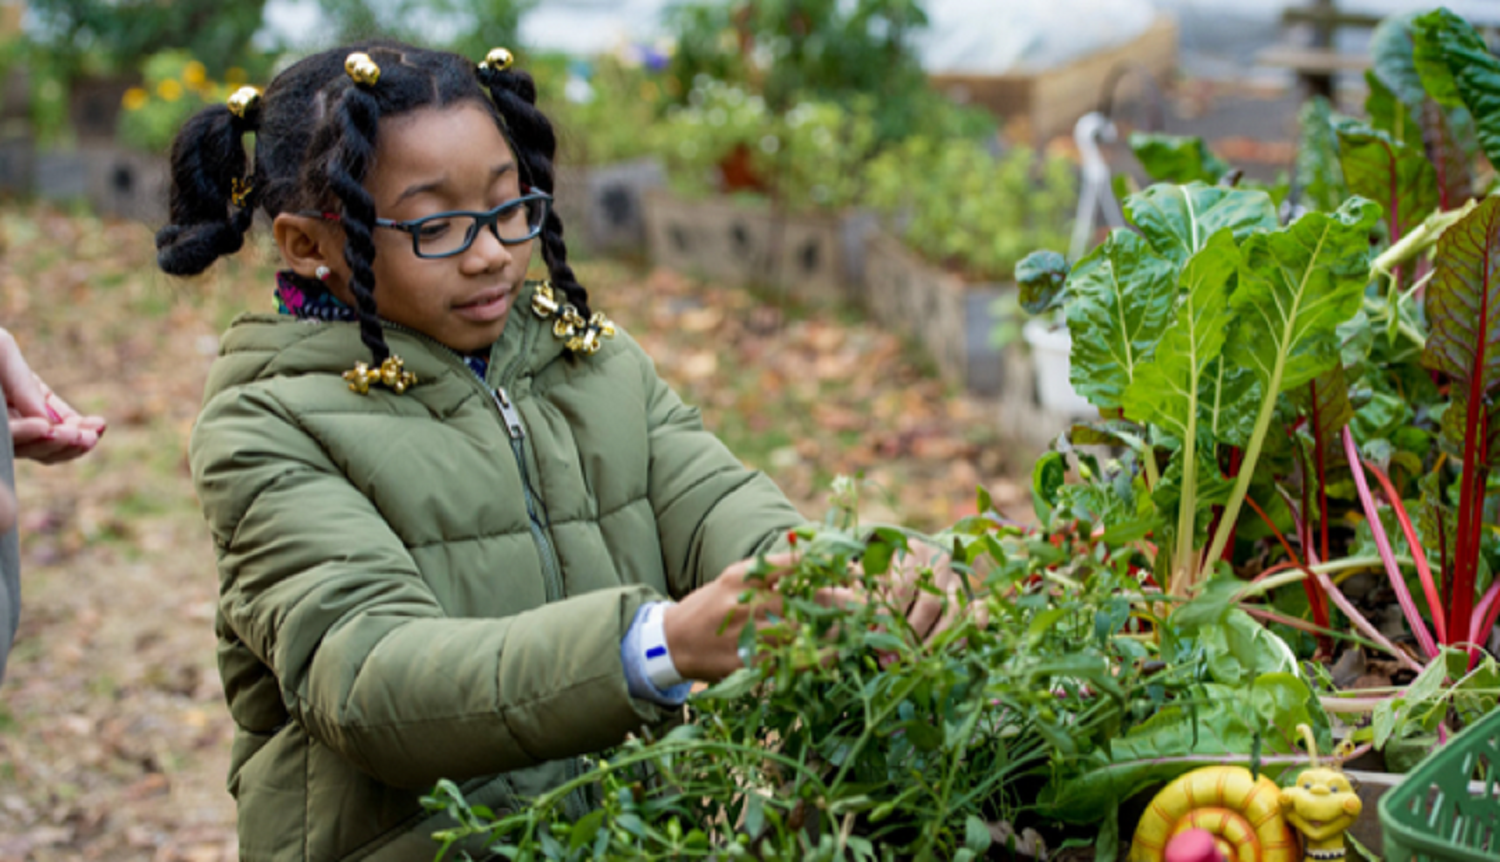 A girl learning about Urban Farming in a community garden.